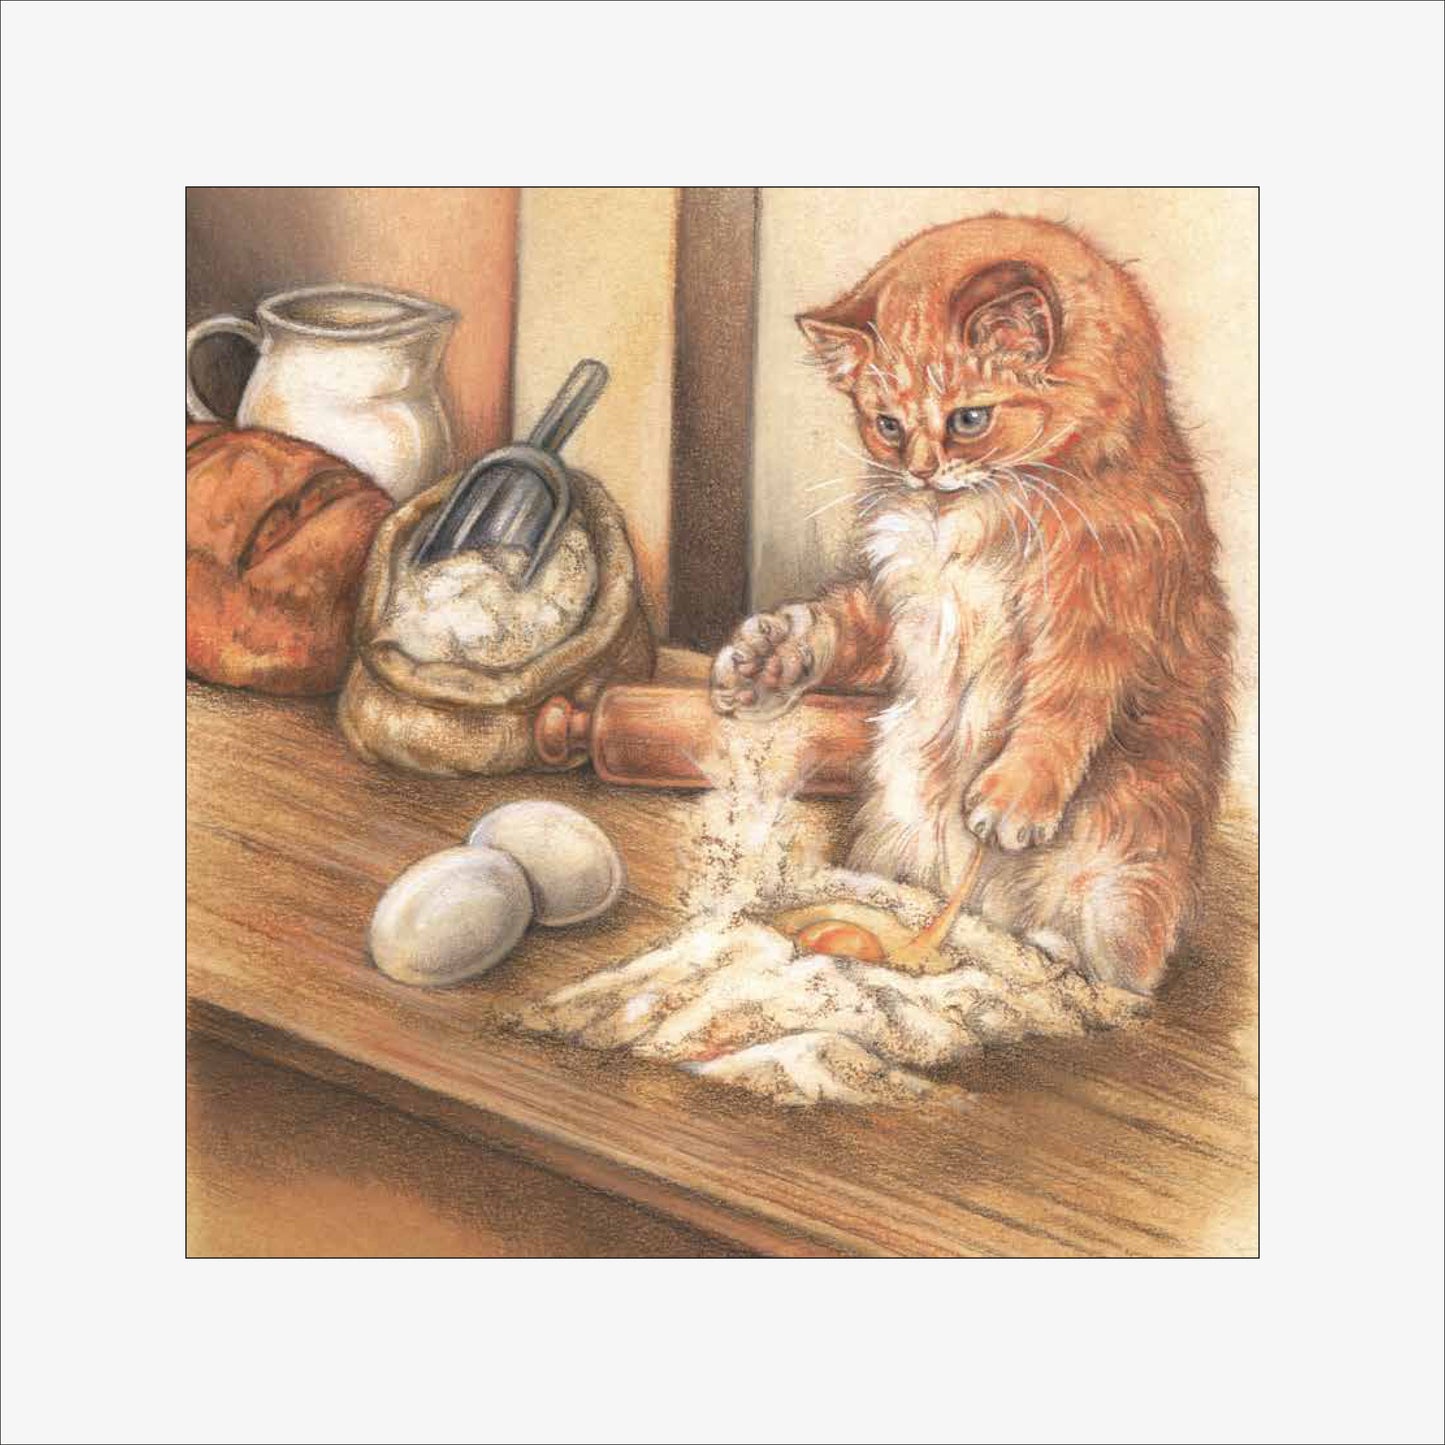 Reproduction "Cat in the Kitchen".